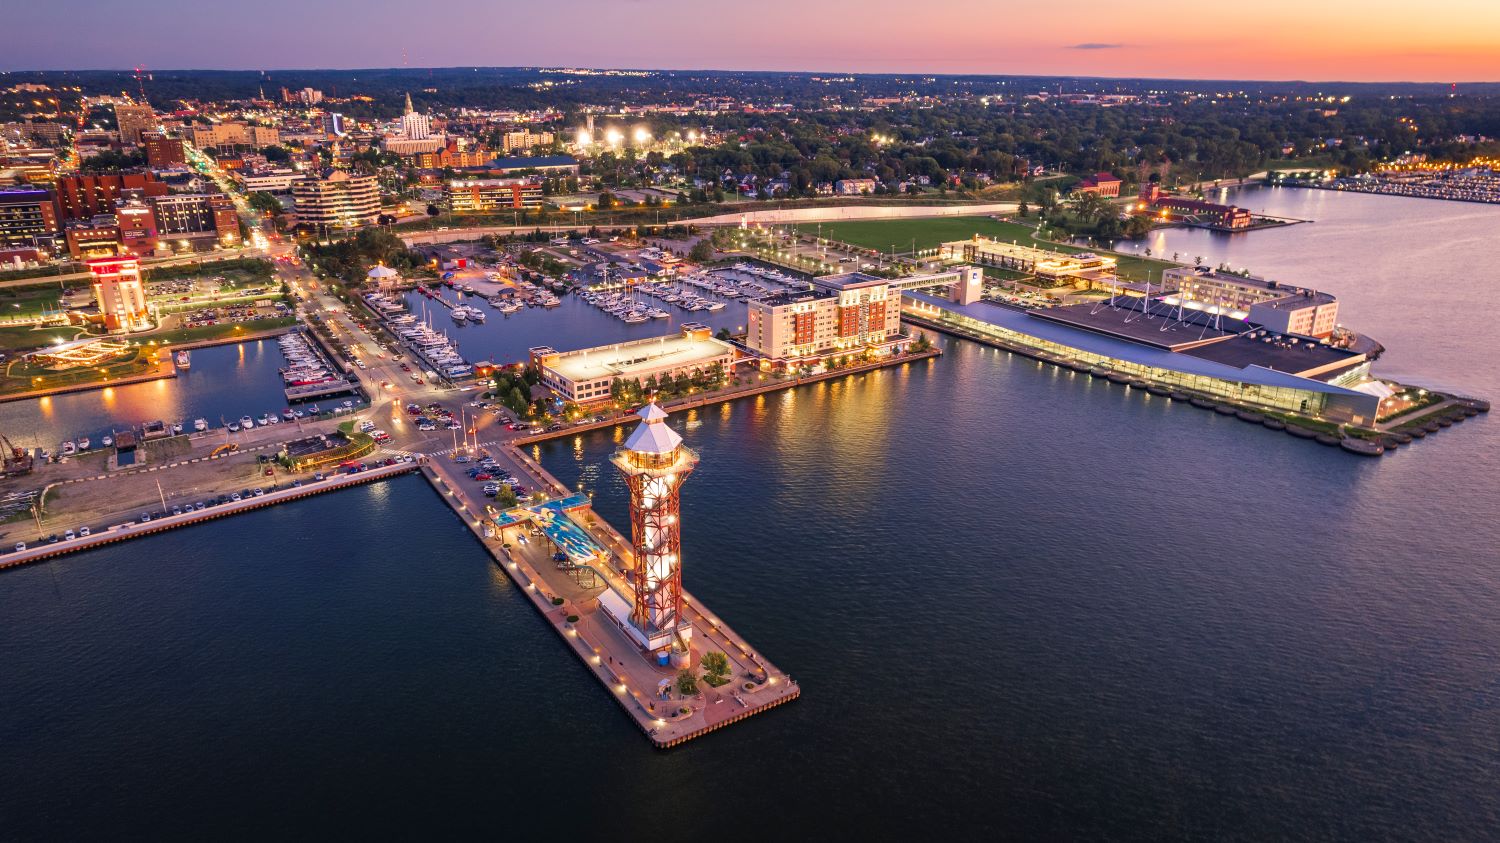 Bayfront Aerial at Sunset given with permission from photog Patrick Grab resize